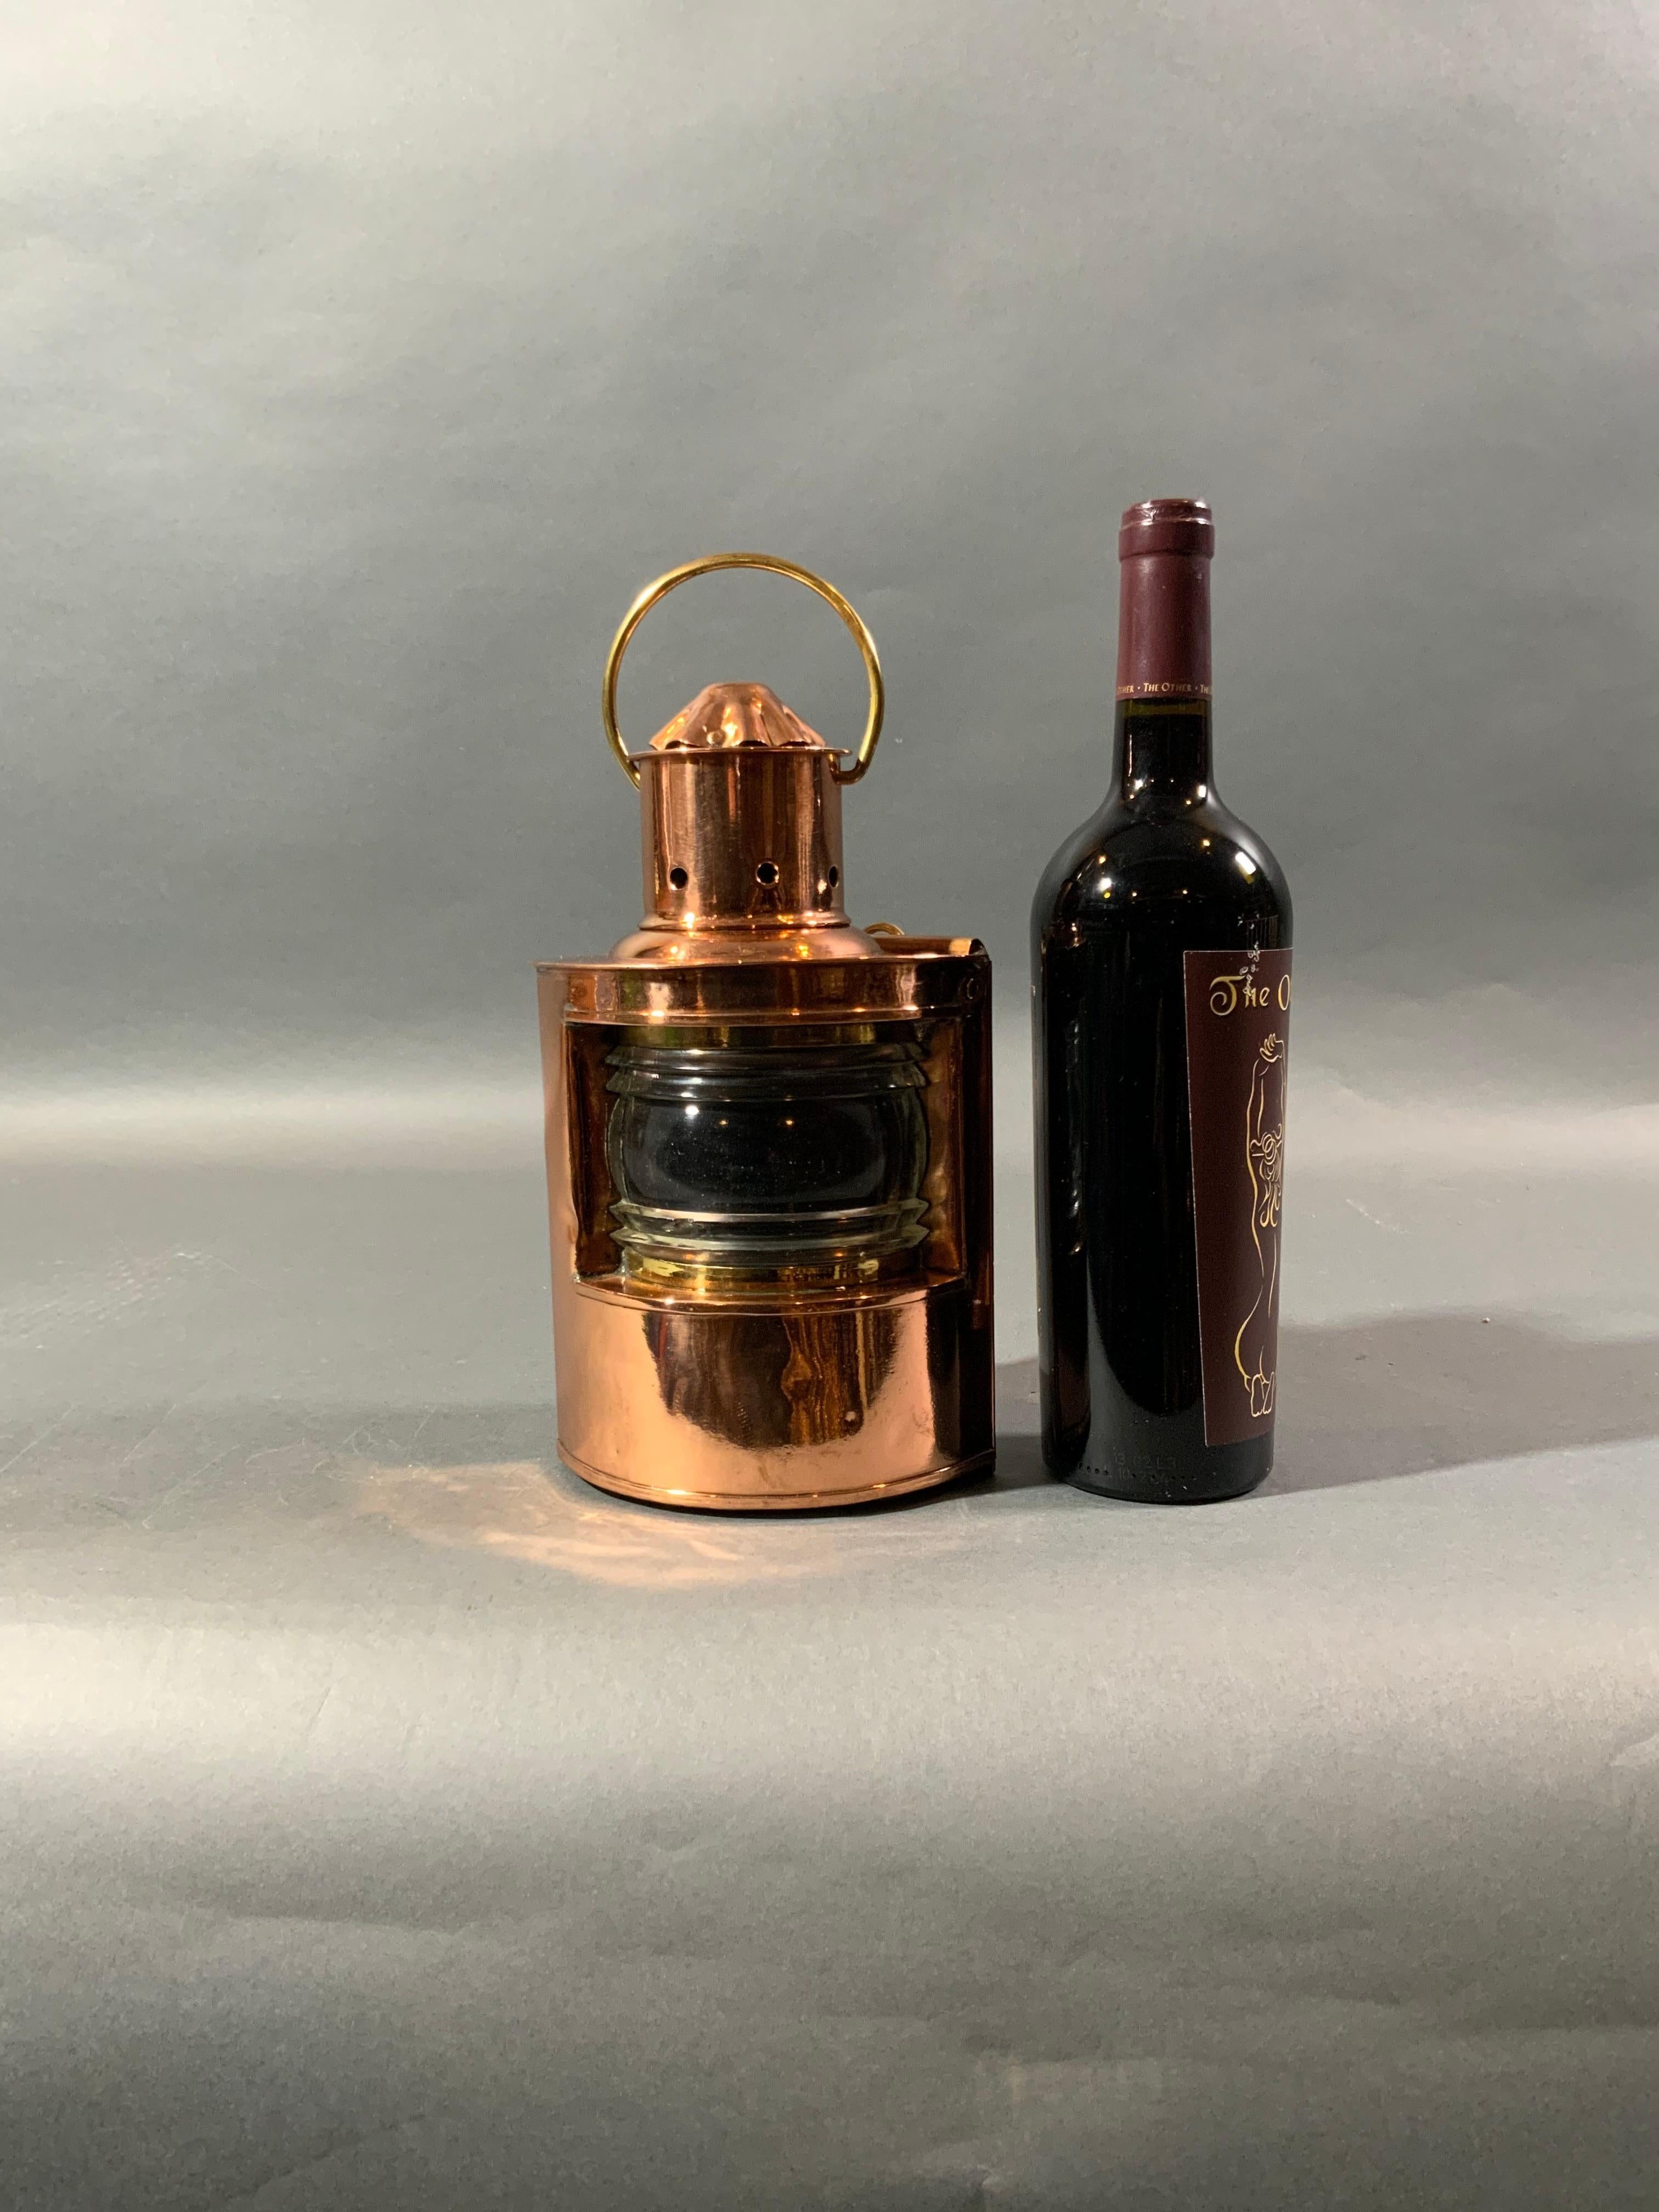 Solid copper ships lantern with Fresnel glass lens. No burner. With vented top, carry handle, and hinged door on rear. Note the flake to the lens. Weight 4 pounds. Dimensions 10 inches tall by 6 by 5. Price $395.